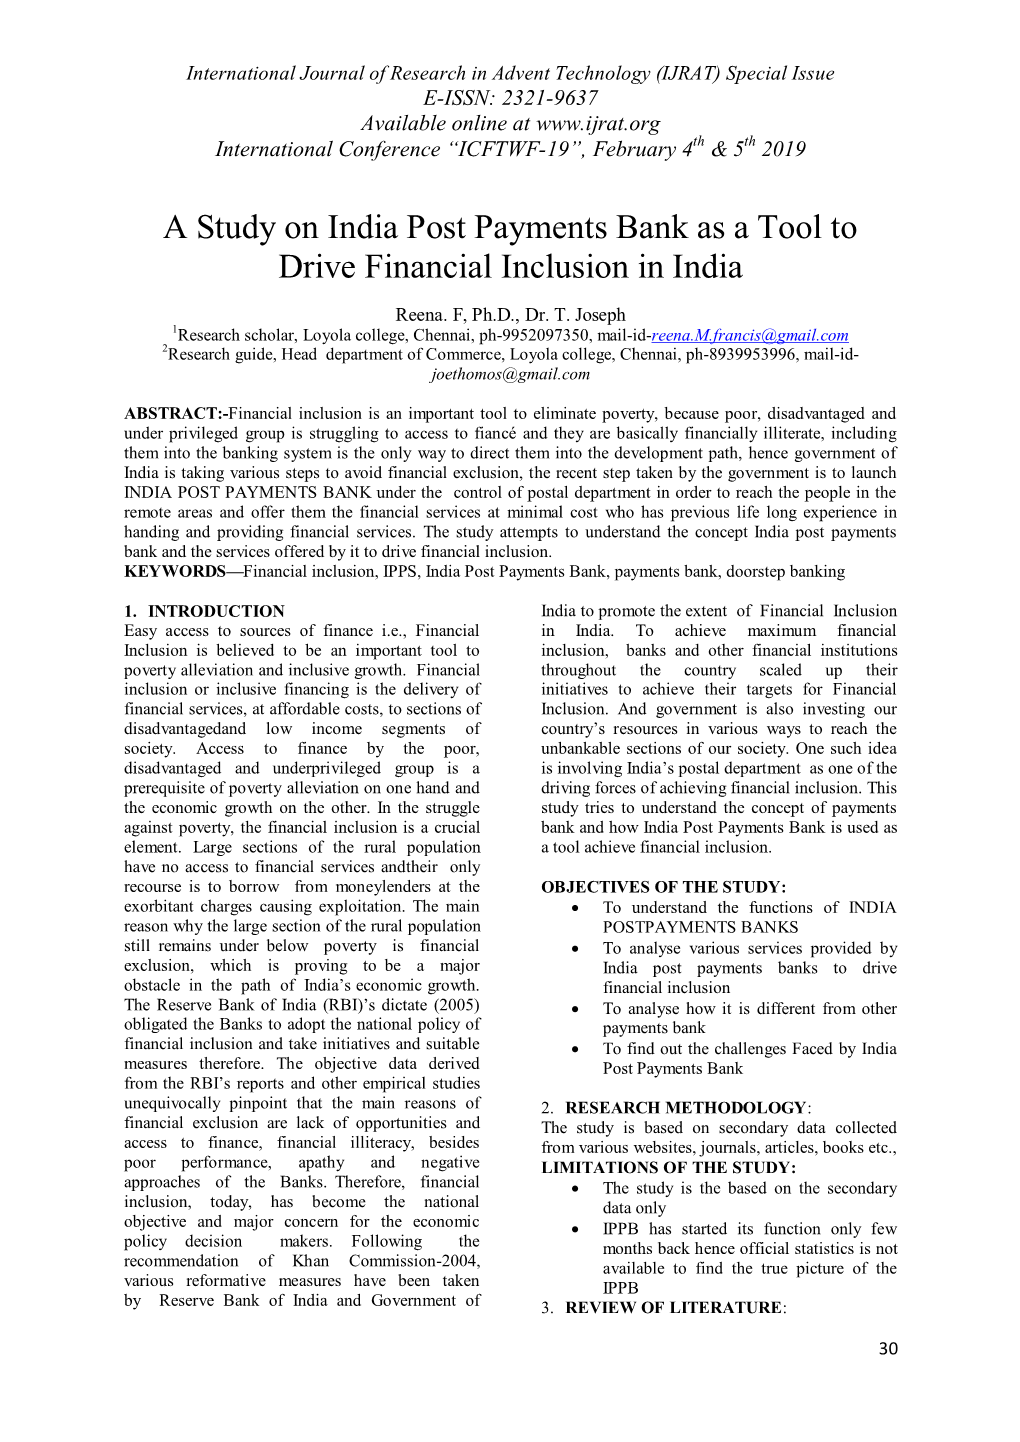 A Study on India Post Payments Bank As a Tool to Drive Financial Inclusion in India